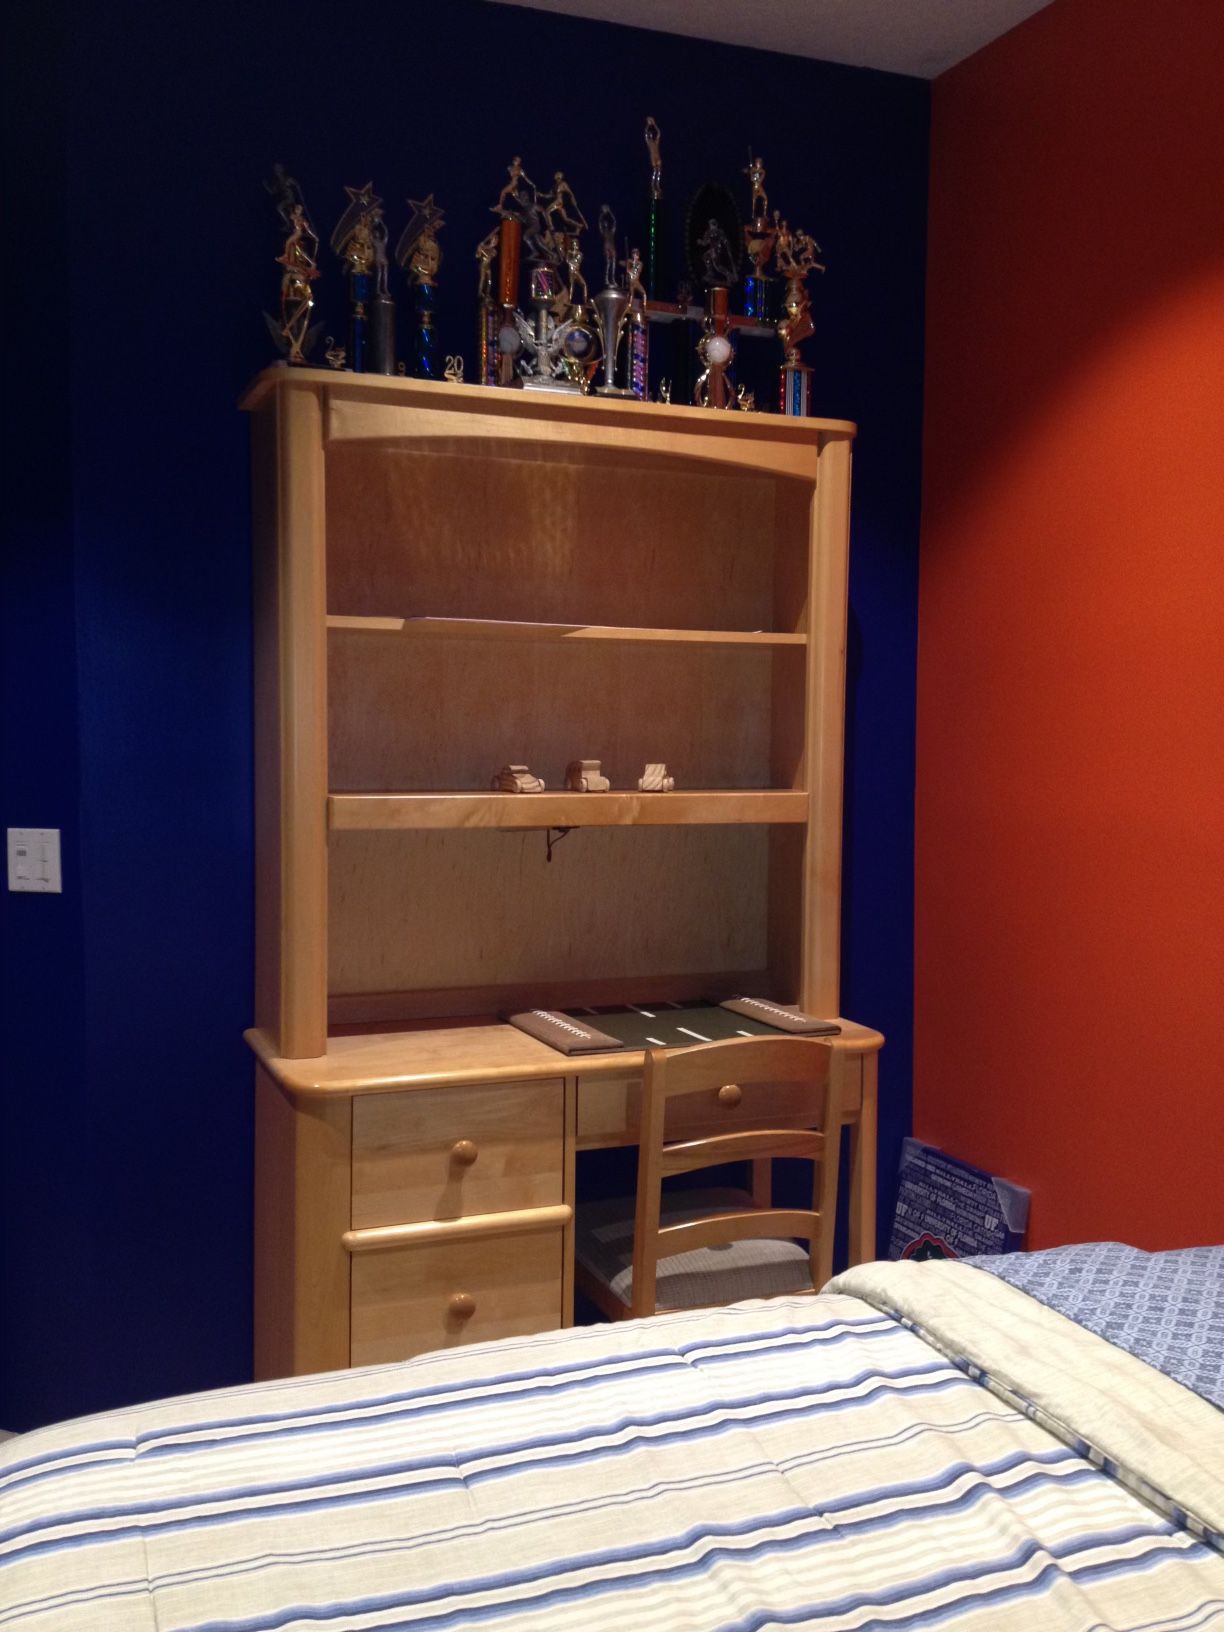 Make Offer! Childrens Furniture Like new Maple Hutch And Desk With Matching Chair